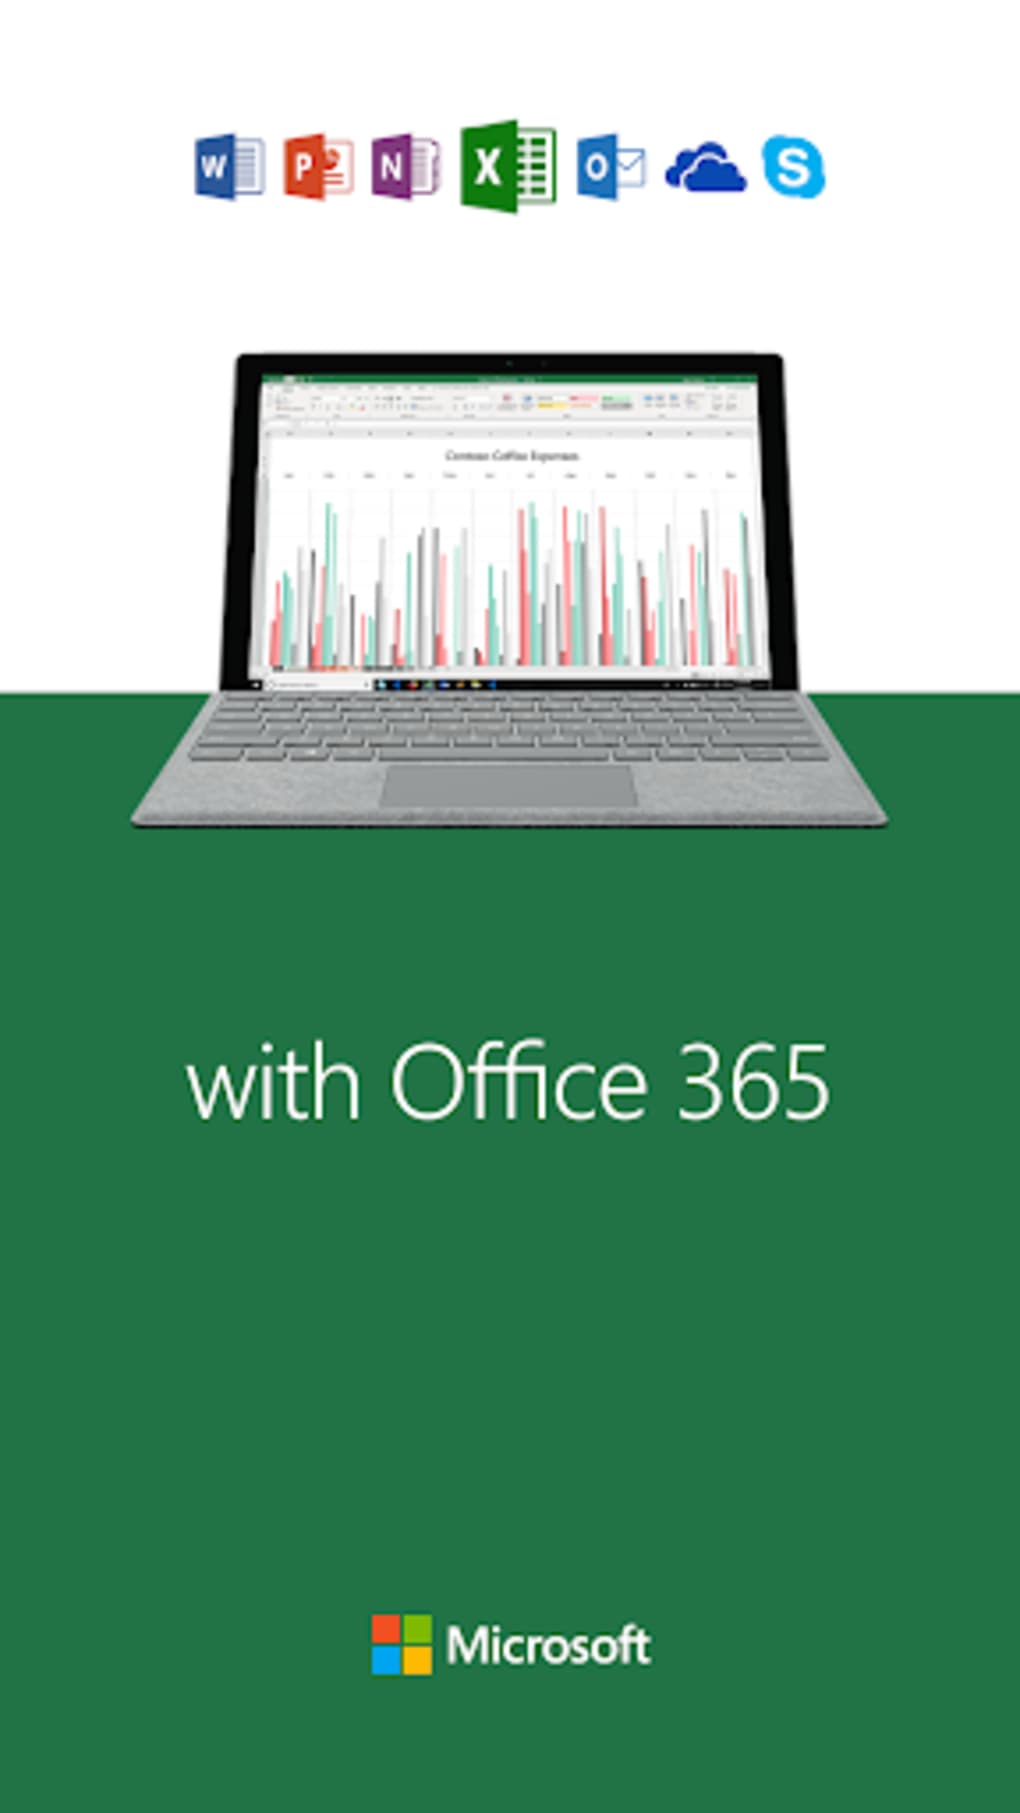 microsoft excel 2019 free download for windows 7 64 bit